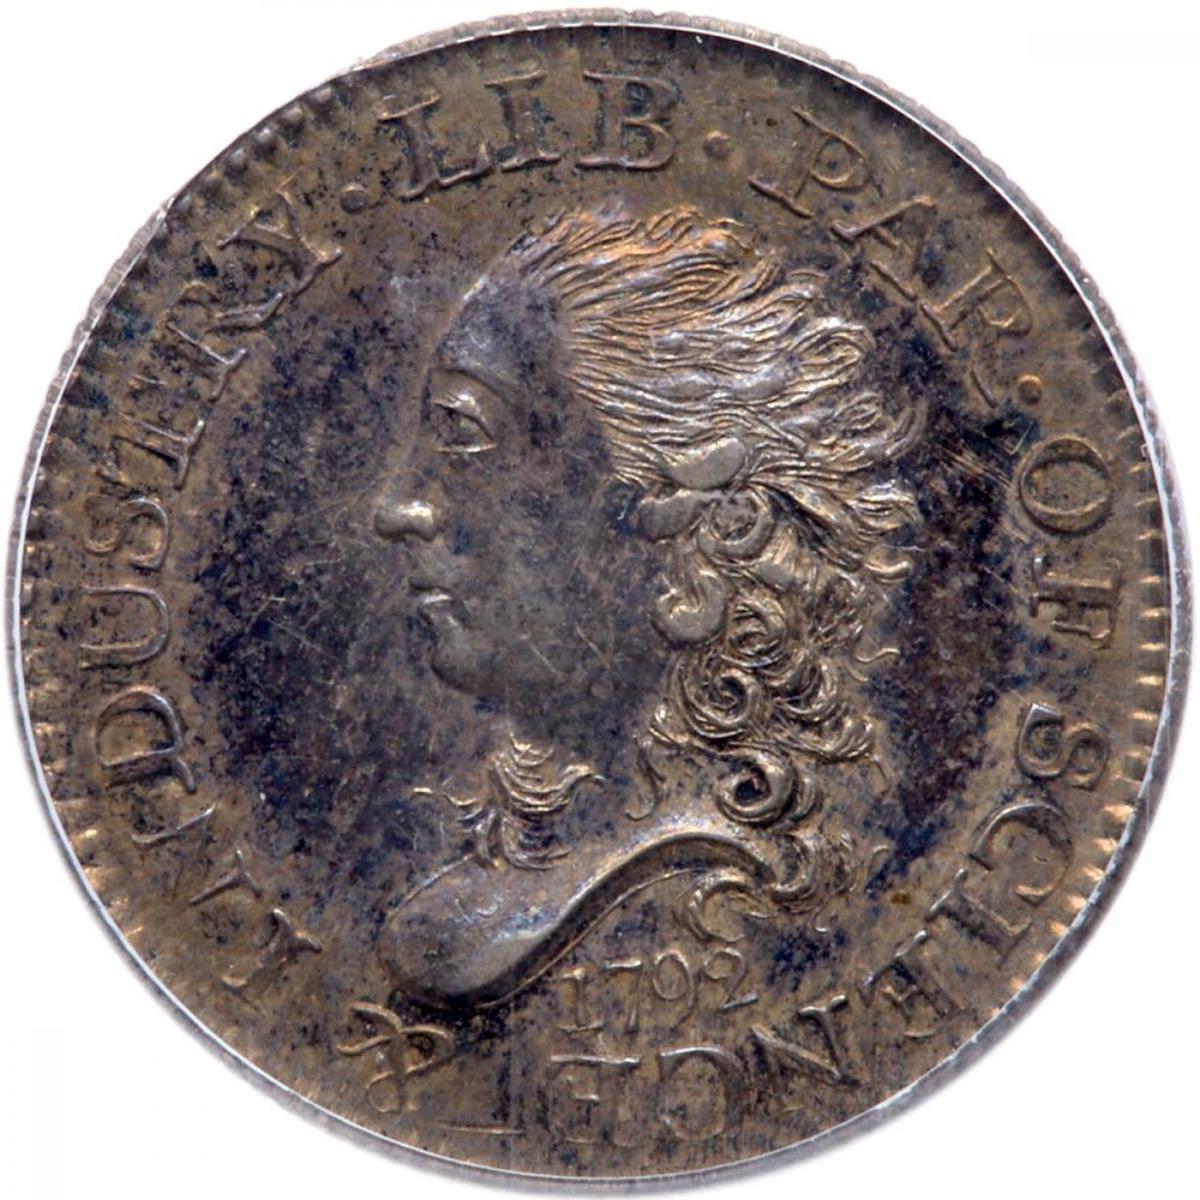 This history of the production of the 1792 half disme is one of the most important events in the birth of our nation’s coinage.  (Image courtesy of Ira & Larry Goldberg Auctioneers)